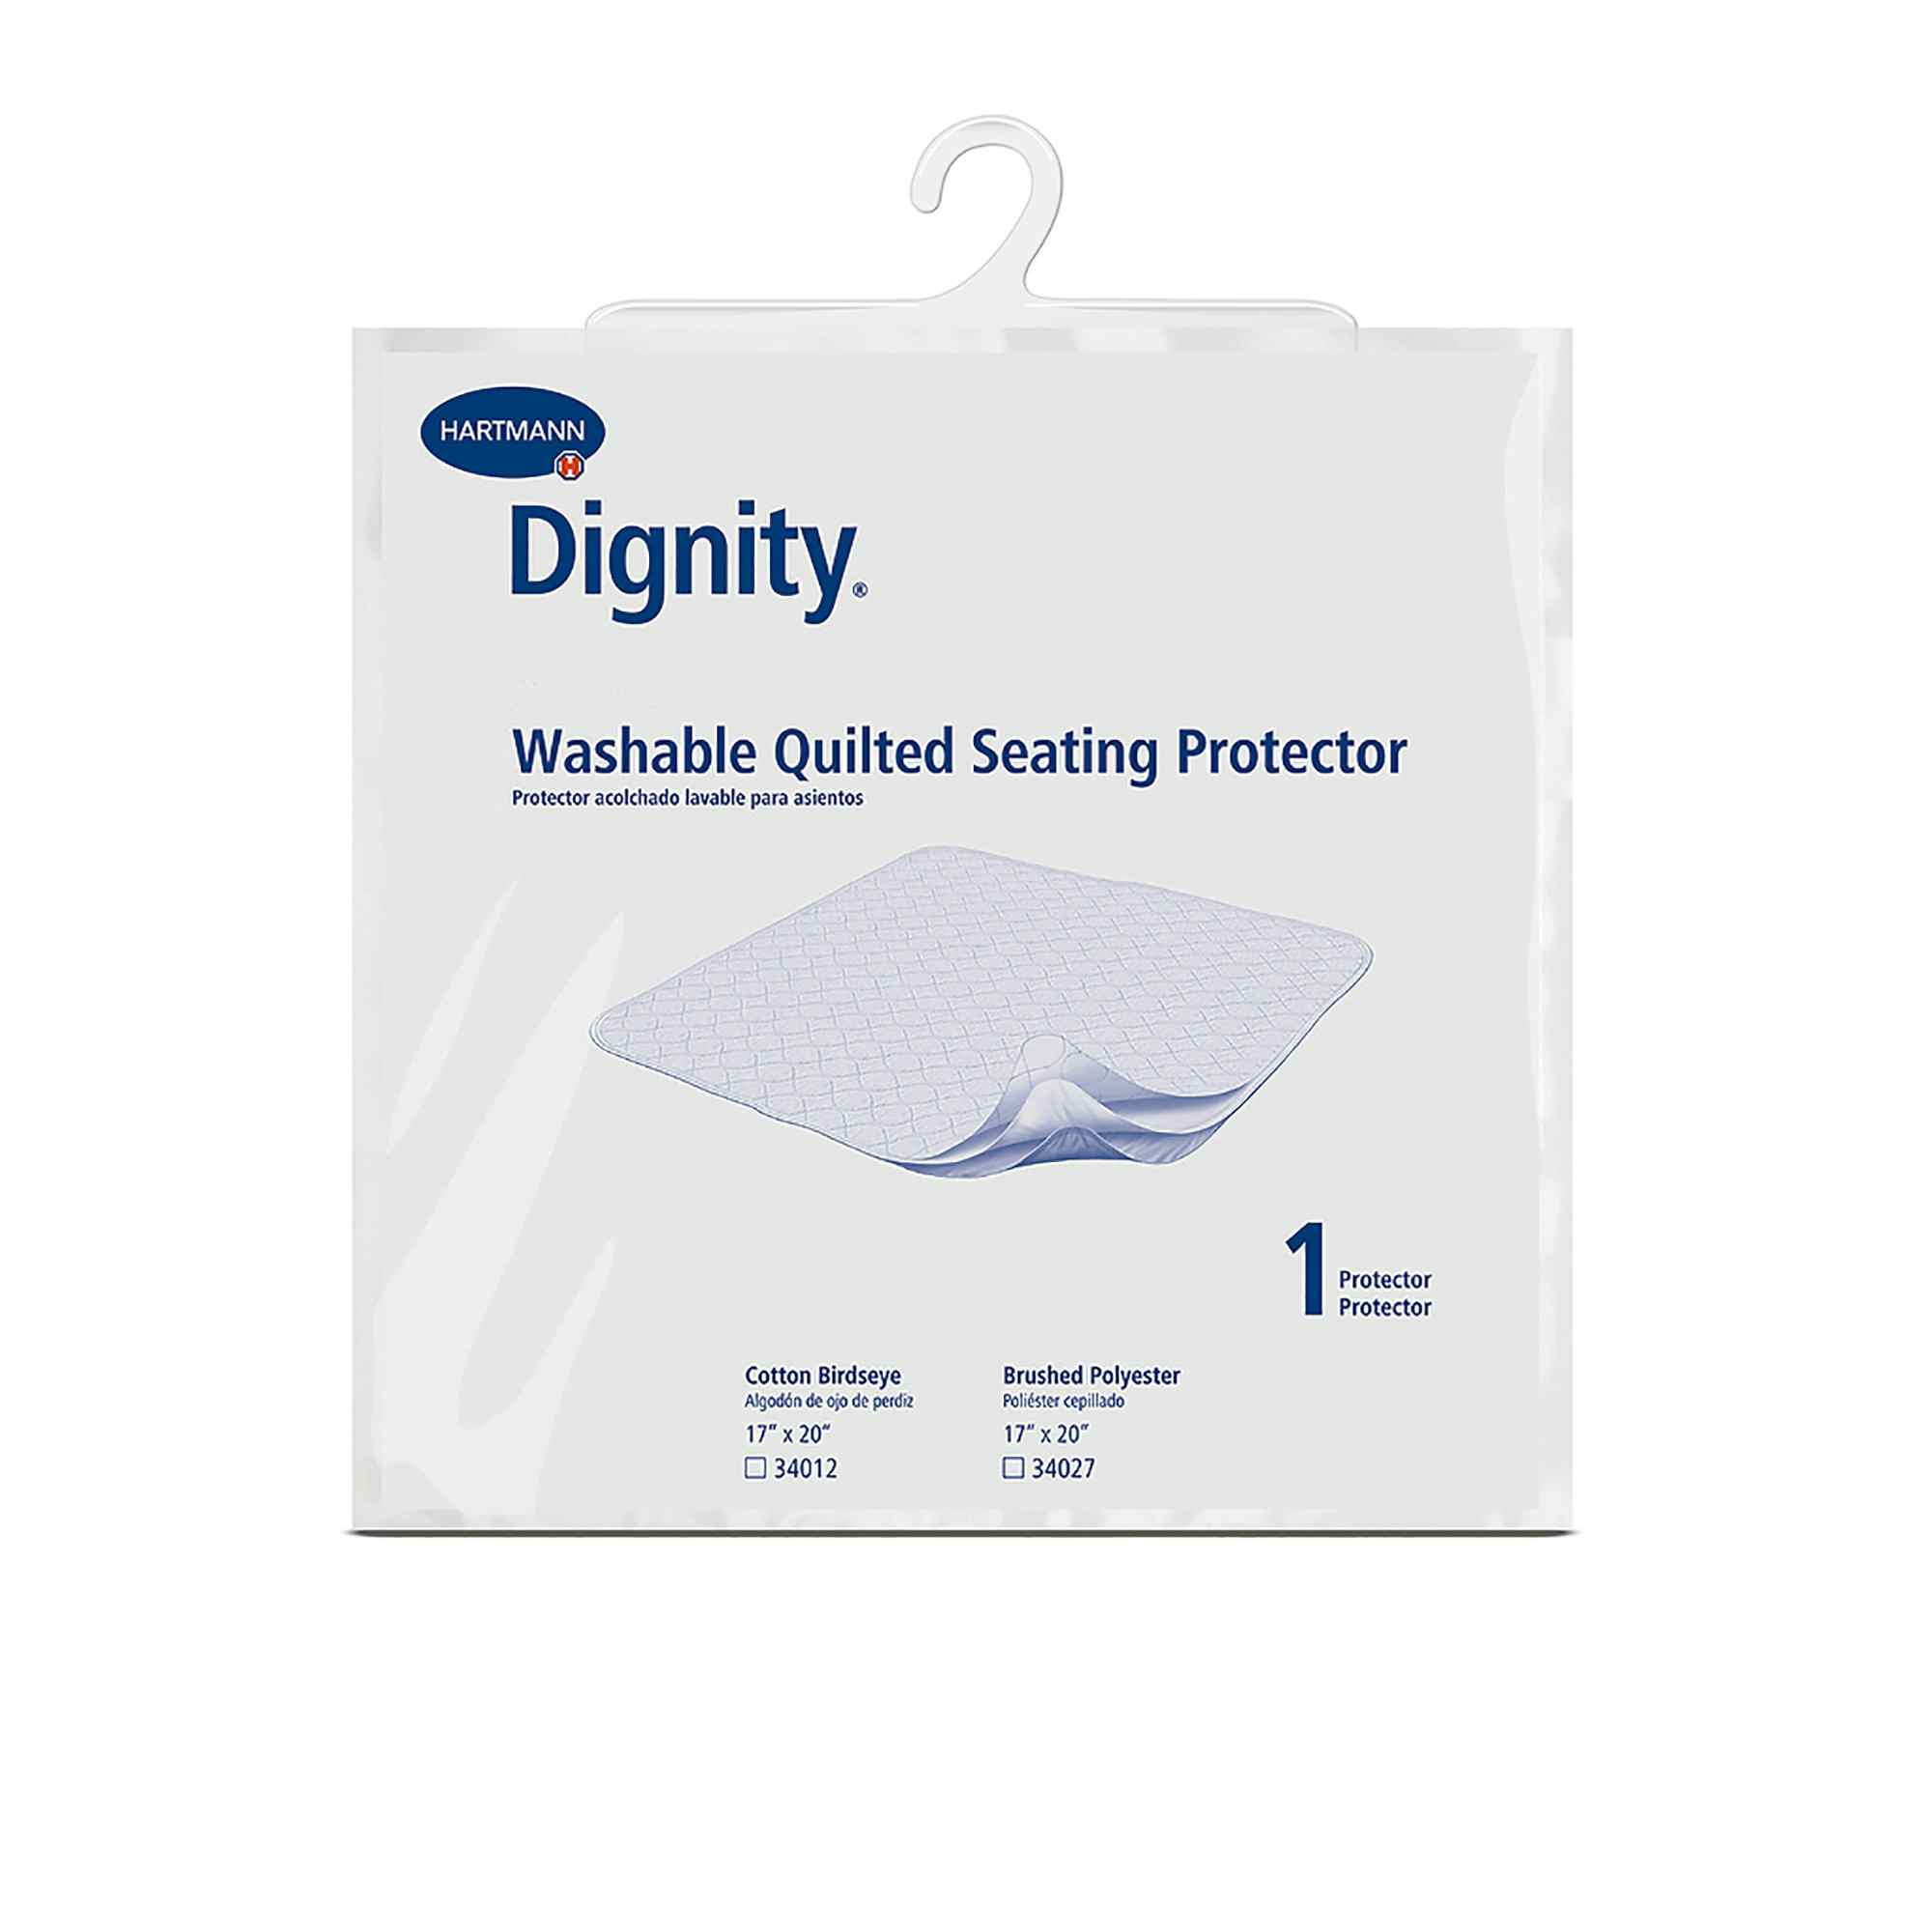 Dignity Washable/Reusable Protectors Underpad, Moderate, 34012, 17 in x 20 in- 1 Each